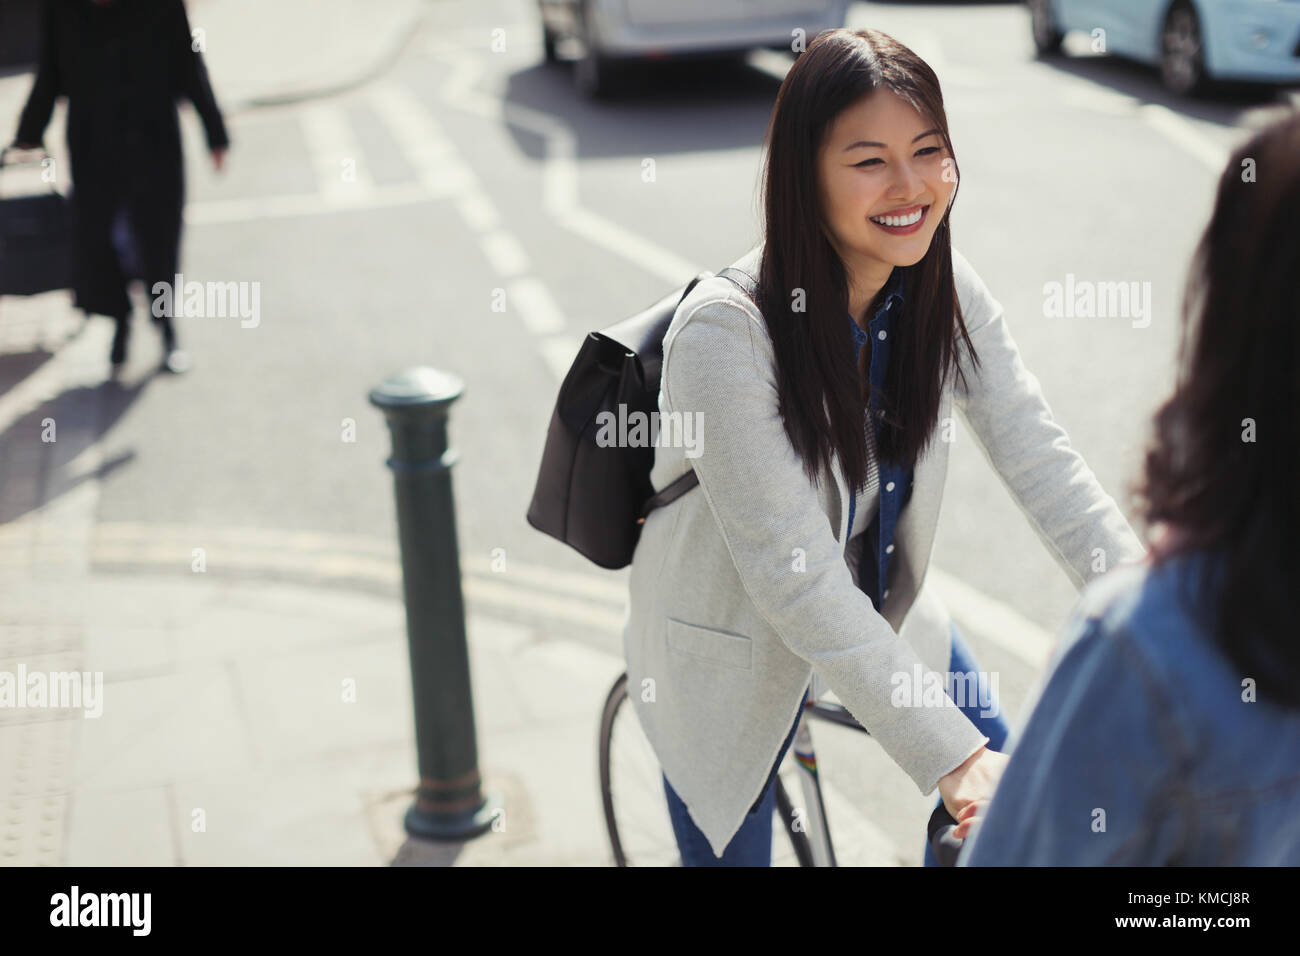 Smiling young woman commuting, riding bicycle on sunny urban sidewalk Stock Photo